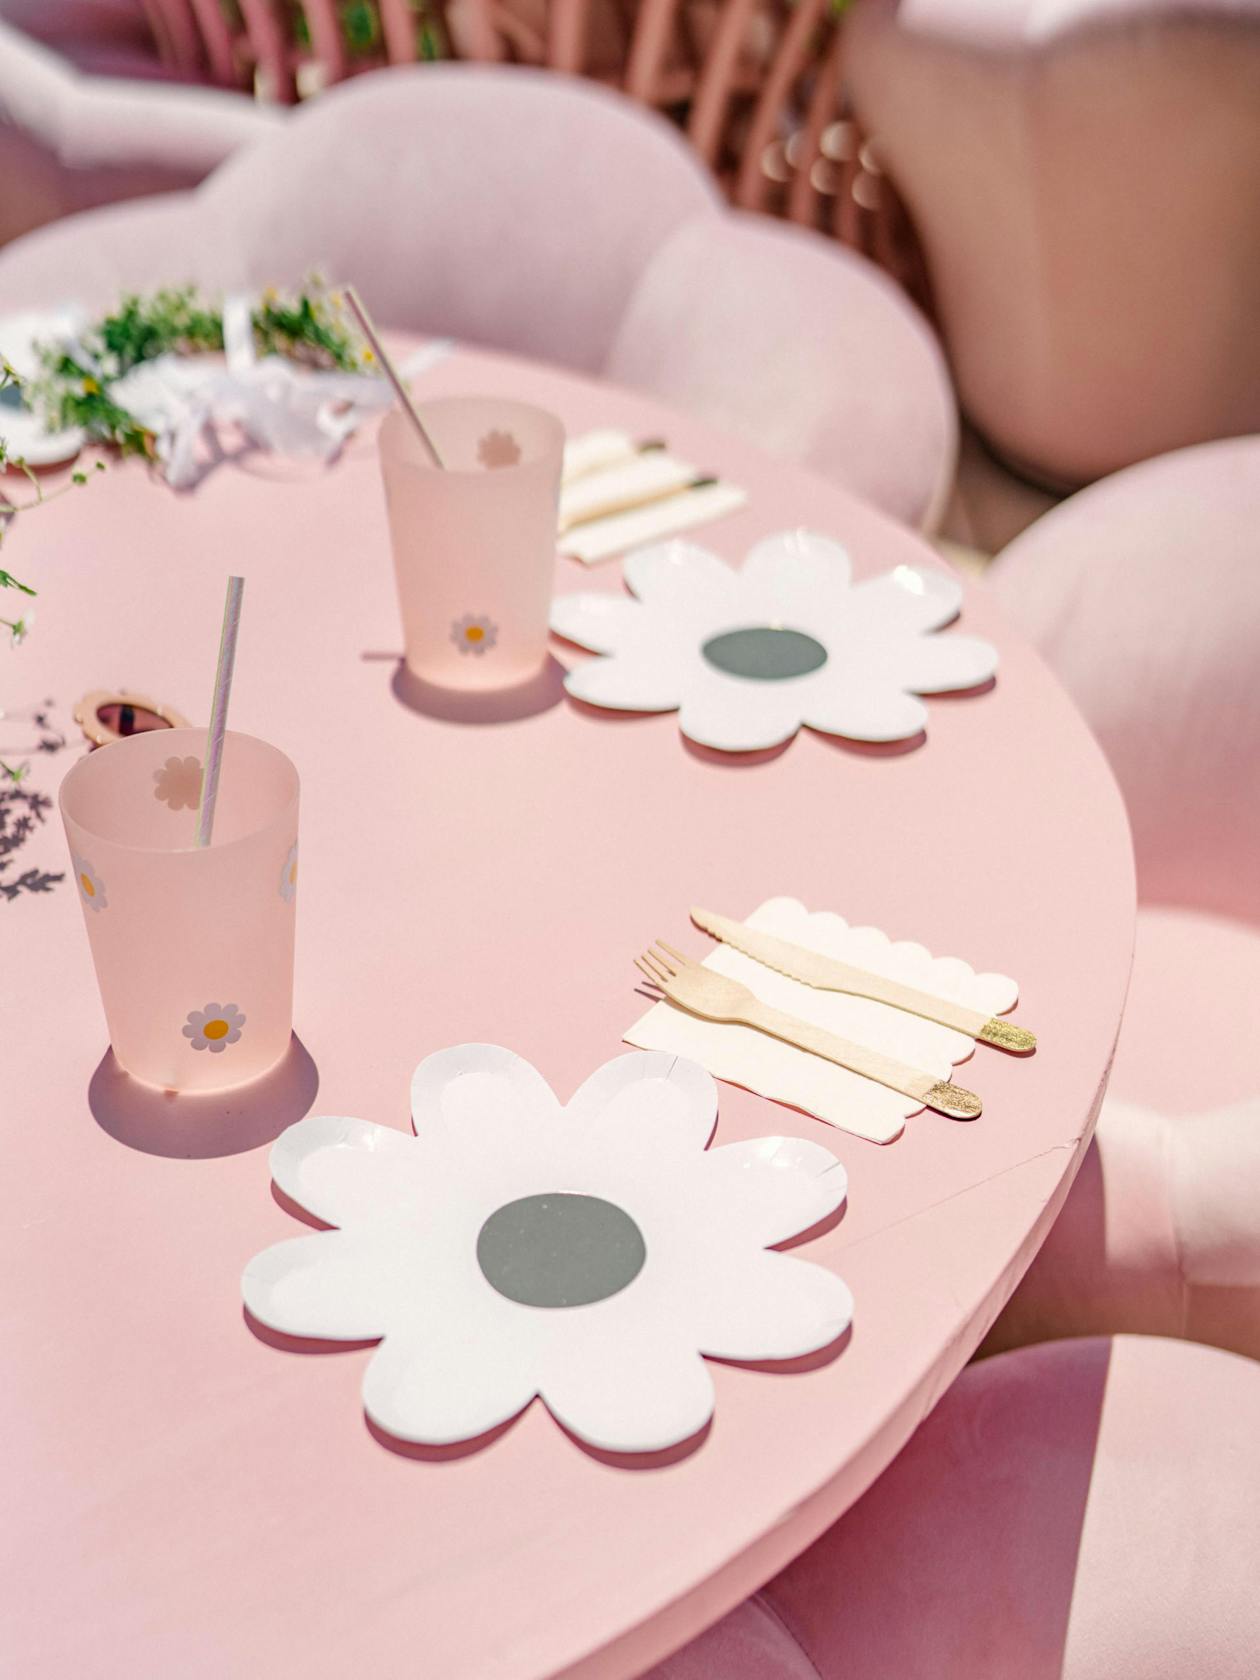 2nd birthday party with pastel colored daisy accents and plates | PartySlate